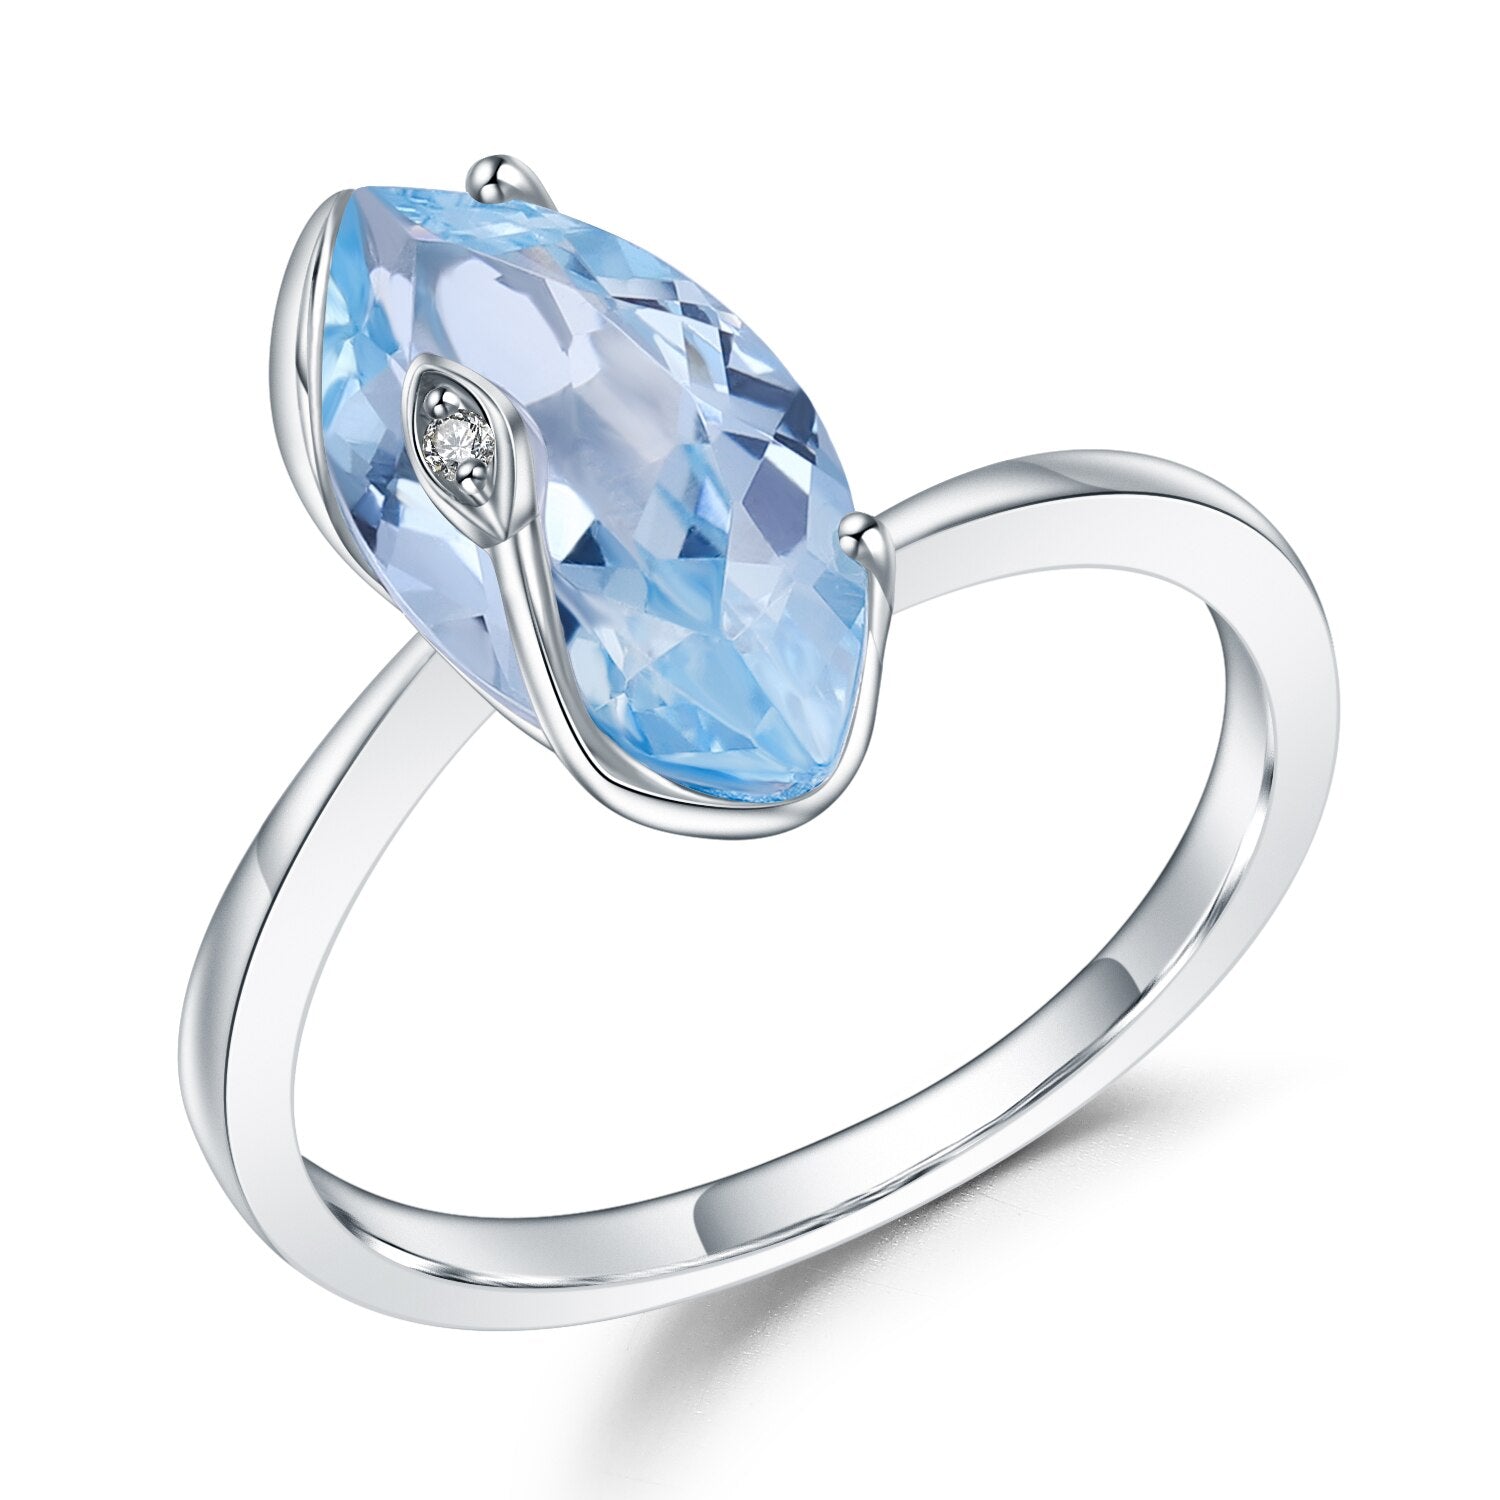 GEM&#39;S BALLET 2.49Ct Marquise Natural Rainbow Mystic Quartz 925 Sterling Silver Gemstone Vintage Rings For Women Fine Jewelry Sky Blue Topaz|925 Sterling Silver